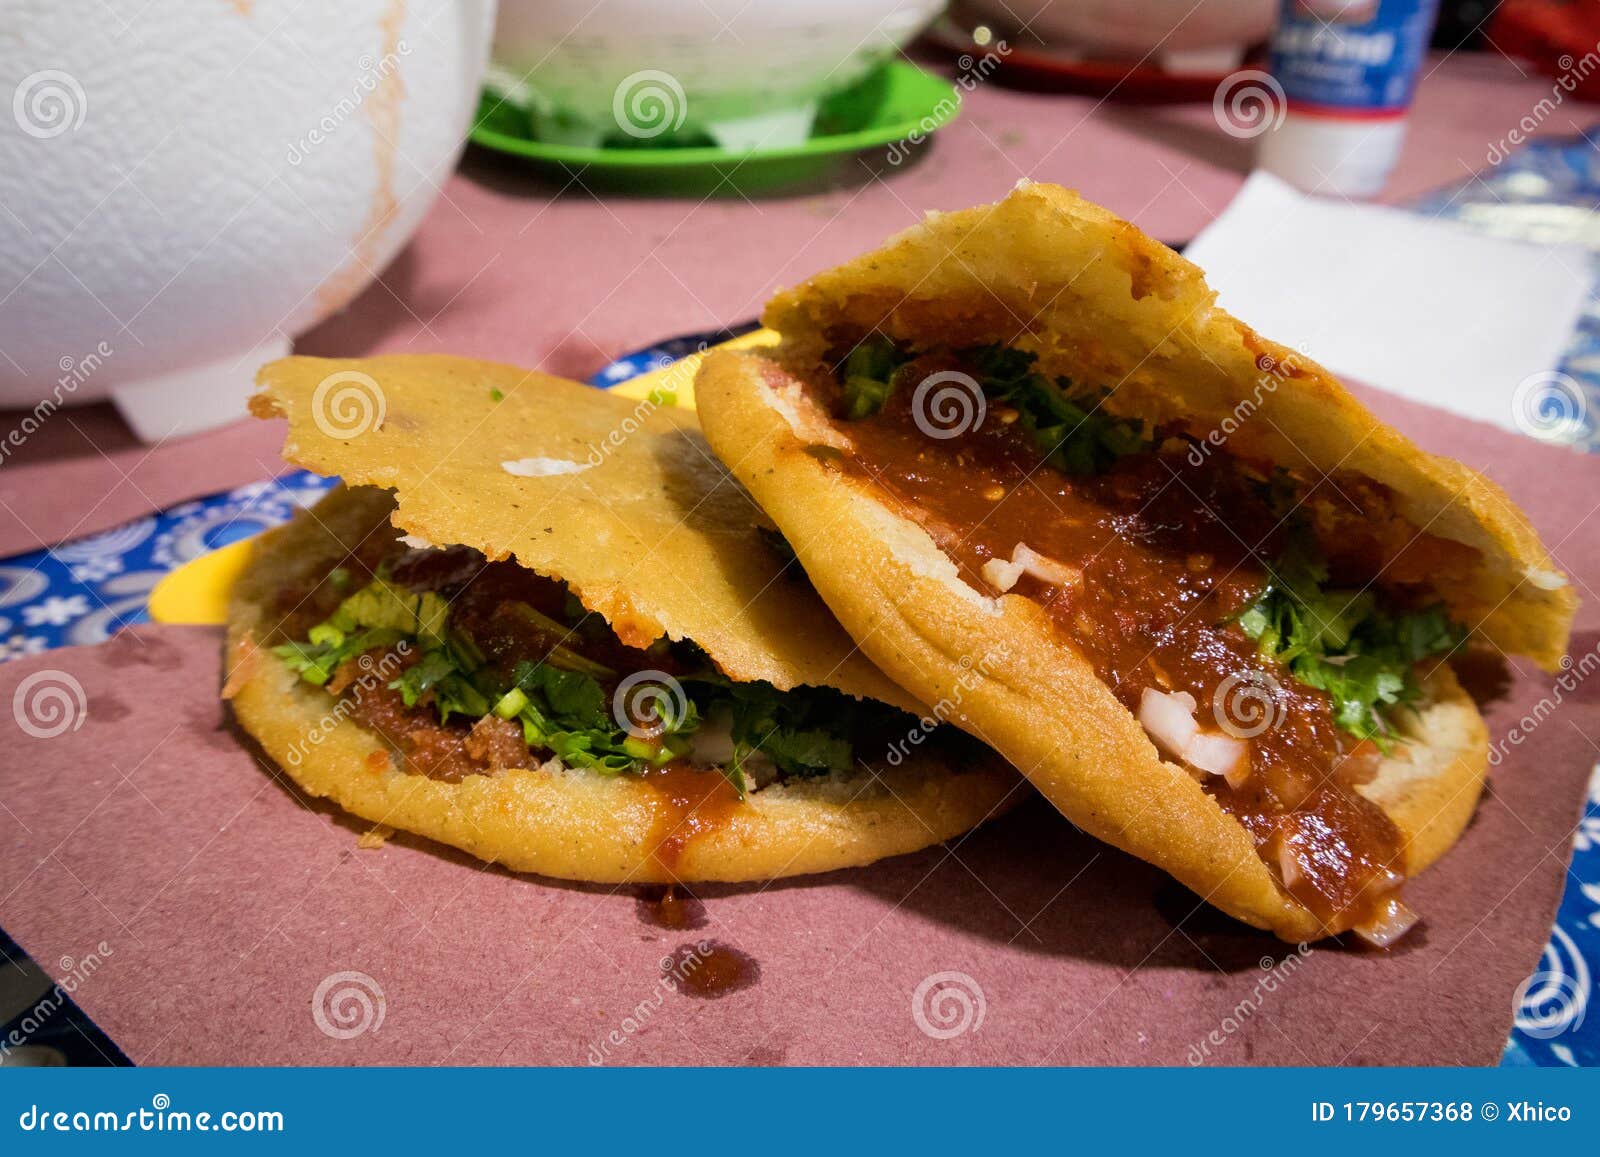 traditional gorditas served with salsa